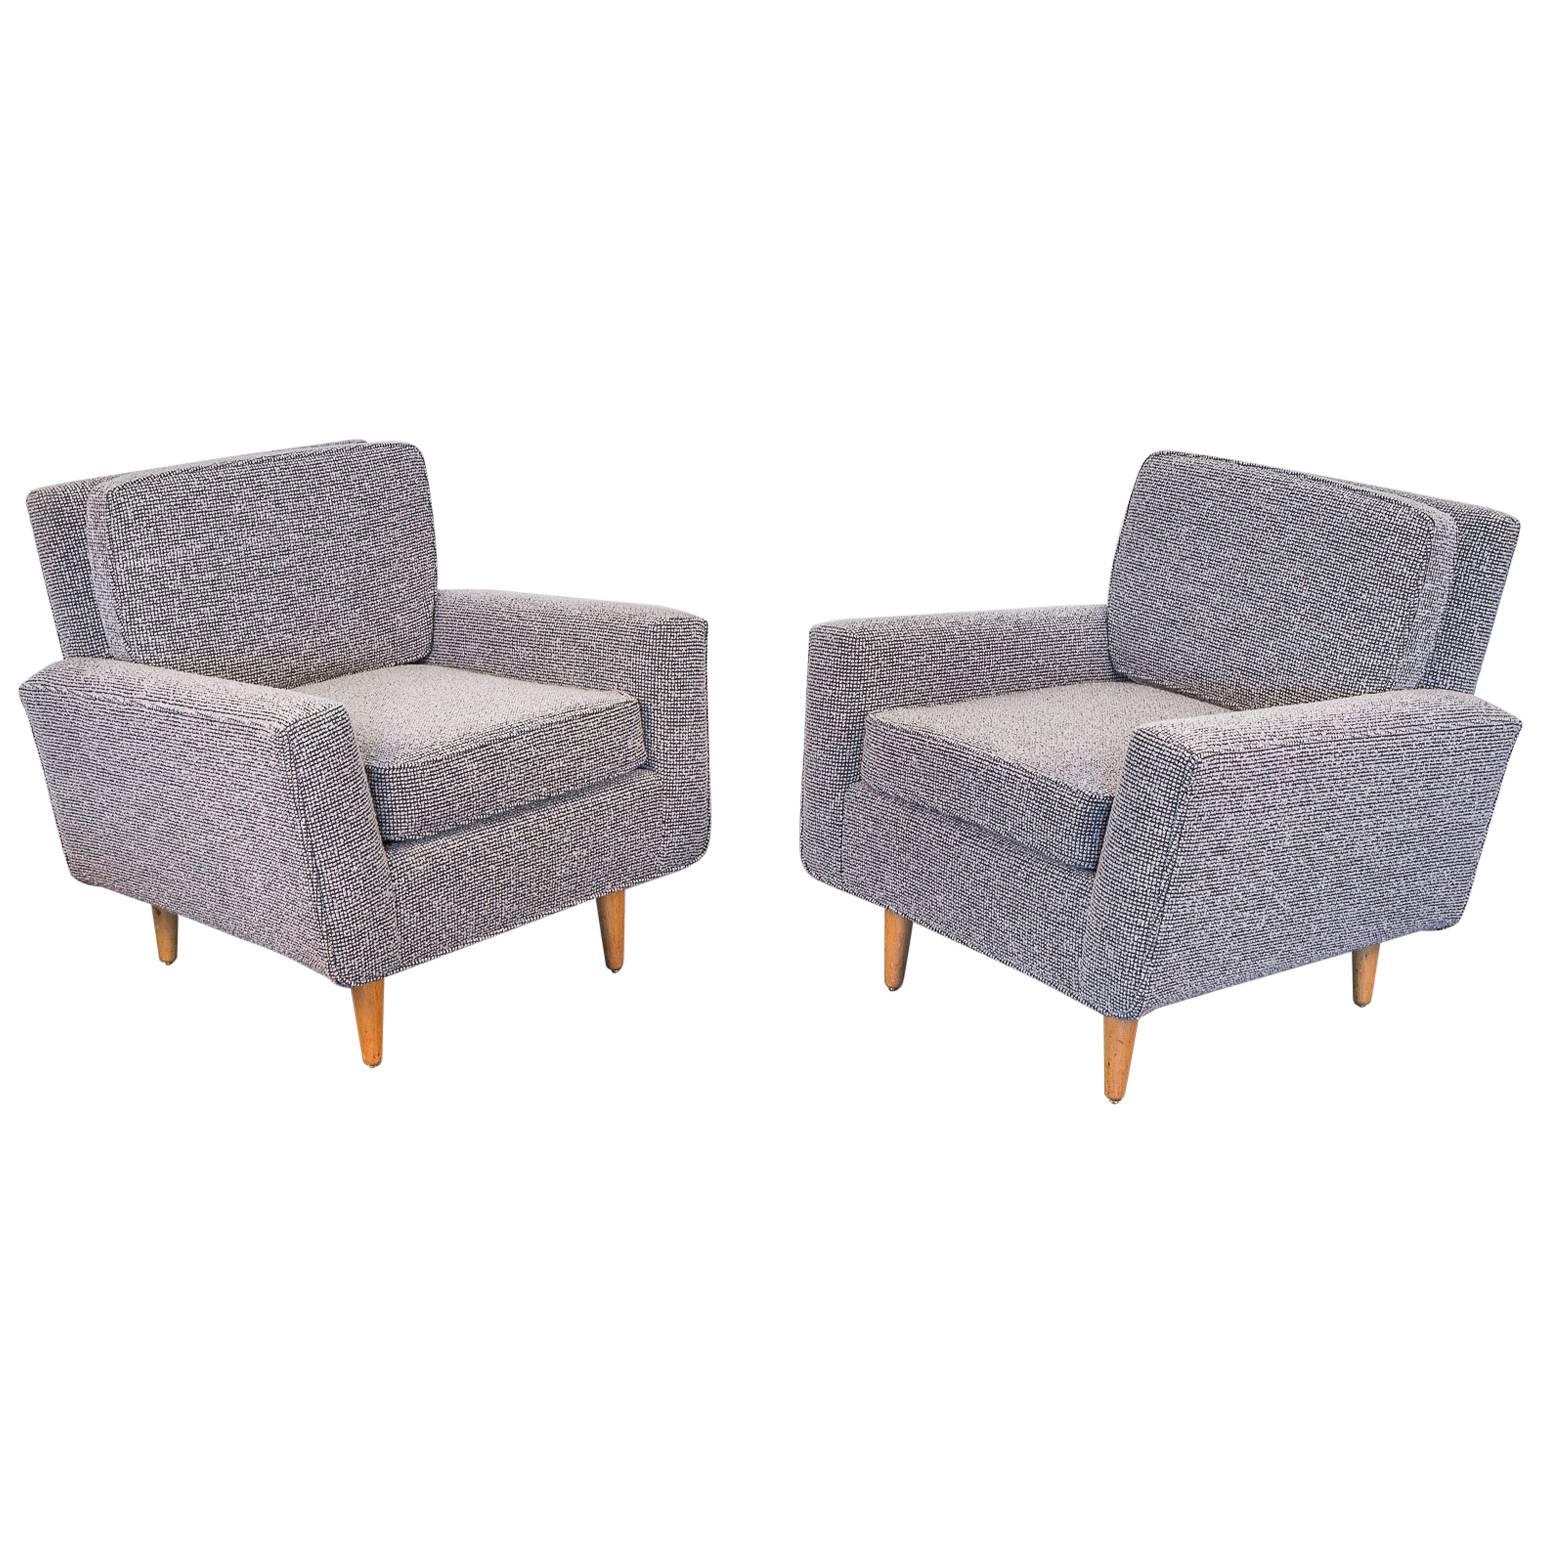 Pair of Florence Knoll Model 25 Lounge Chairs